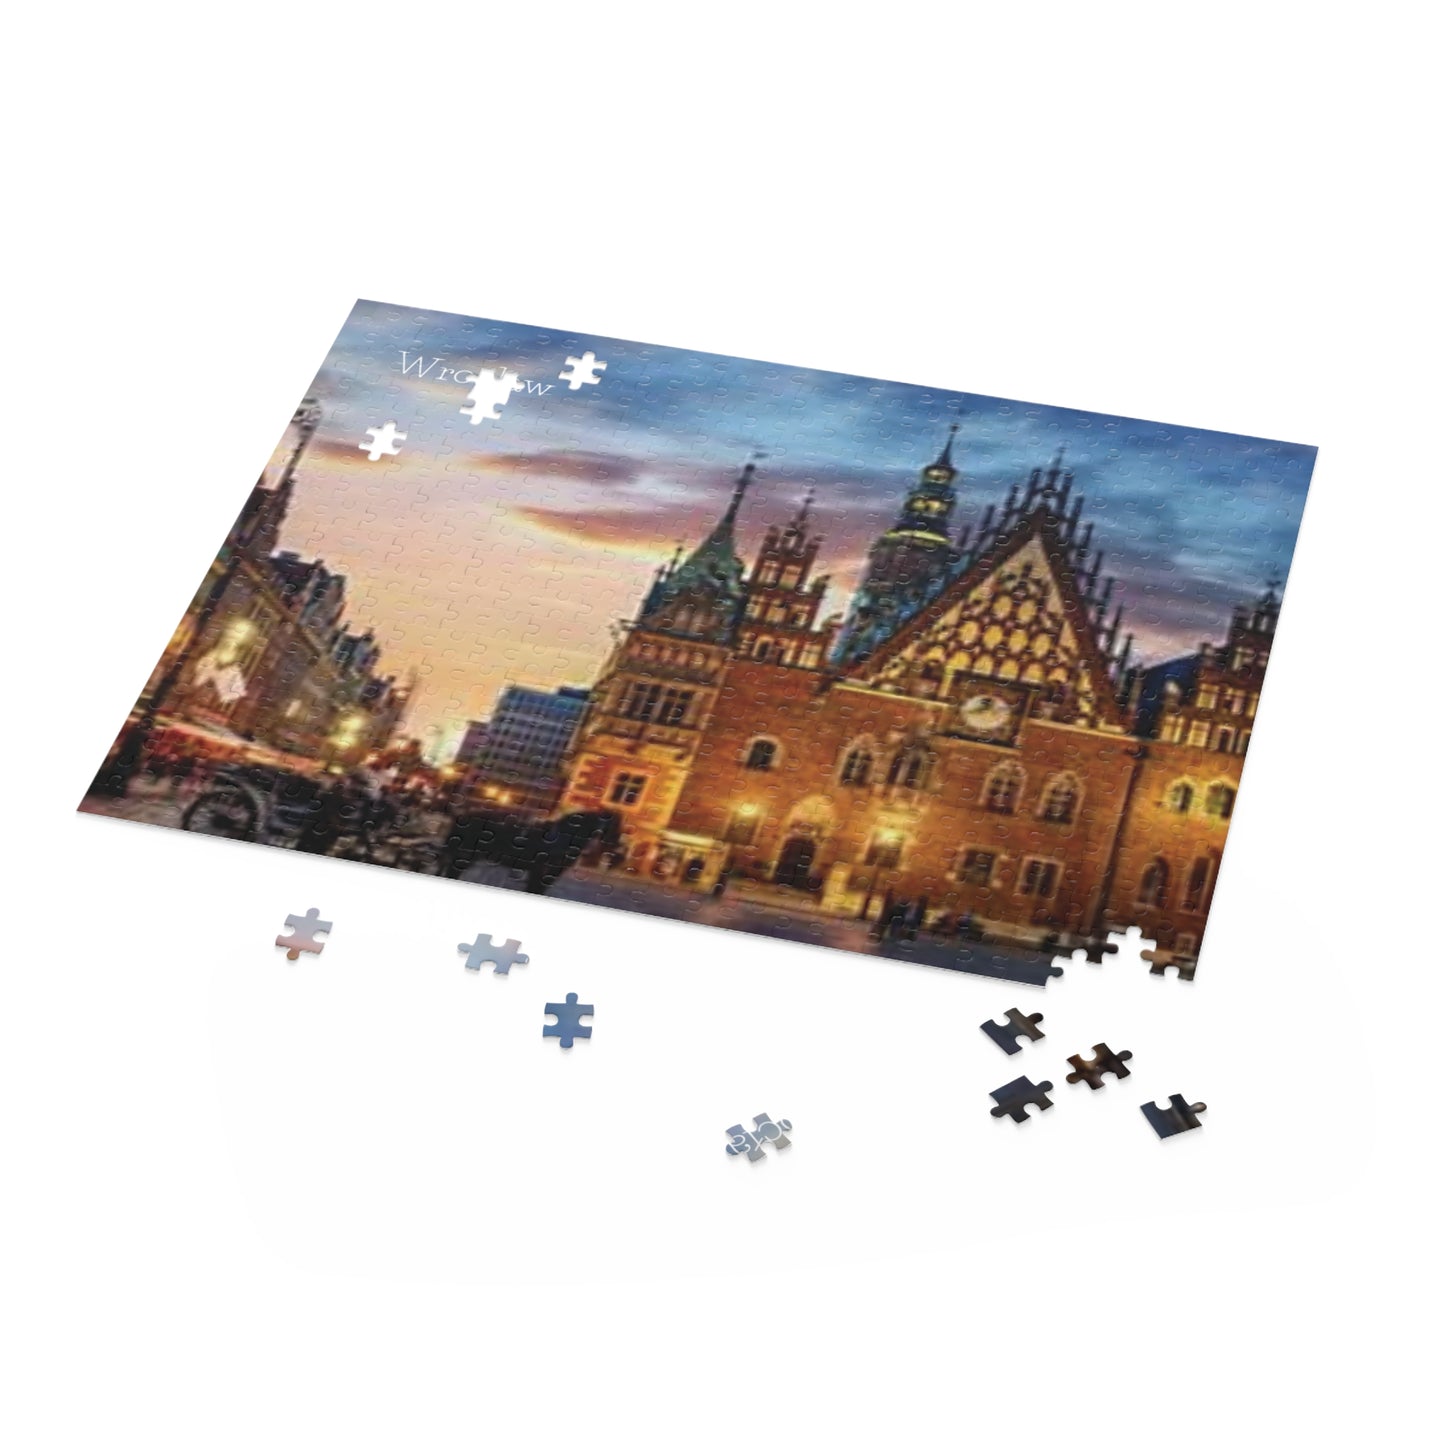 Puzzle Wroclaw Poland (120, 252, 500-Piece) Perfect Gift Family Fun